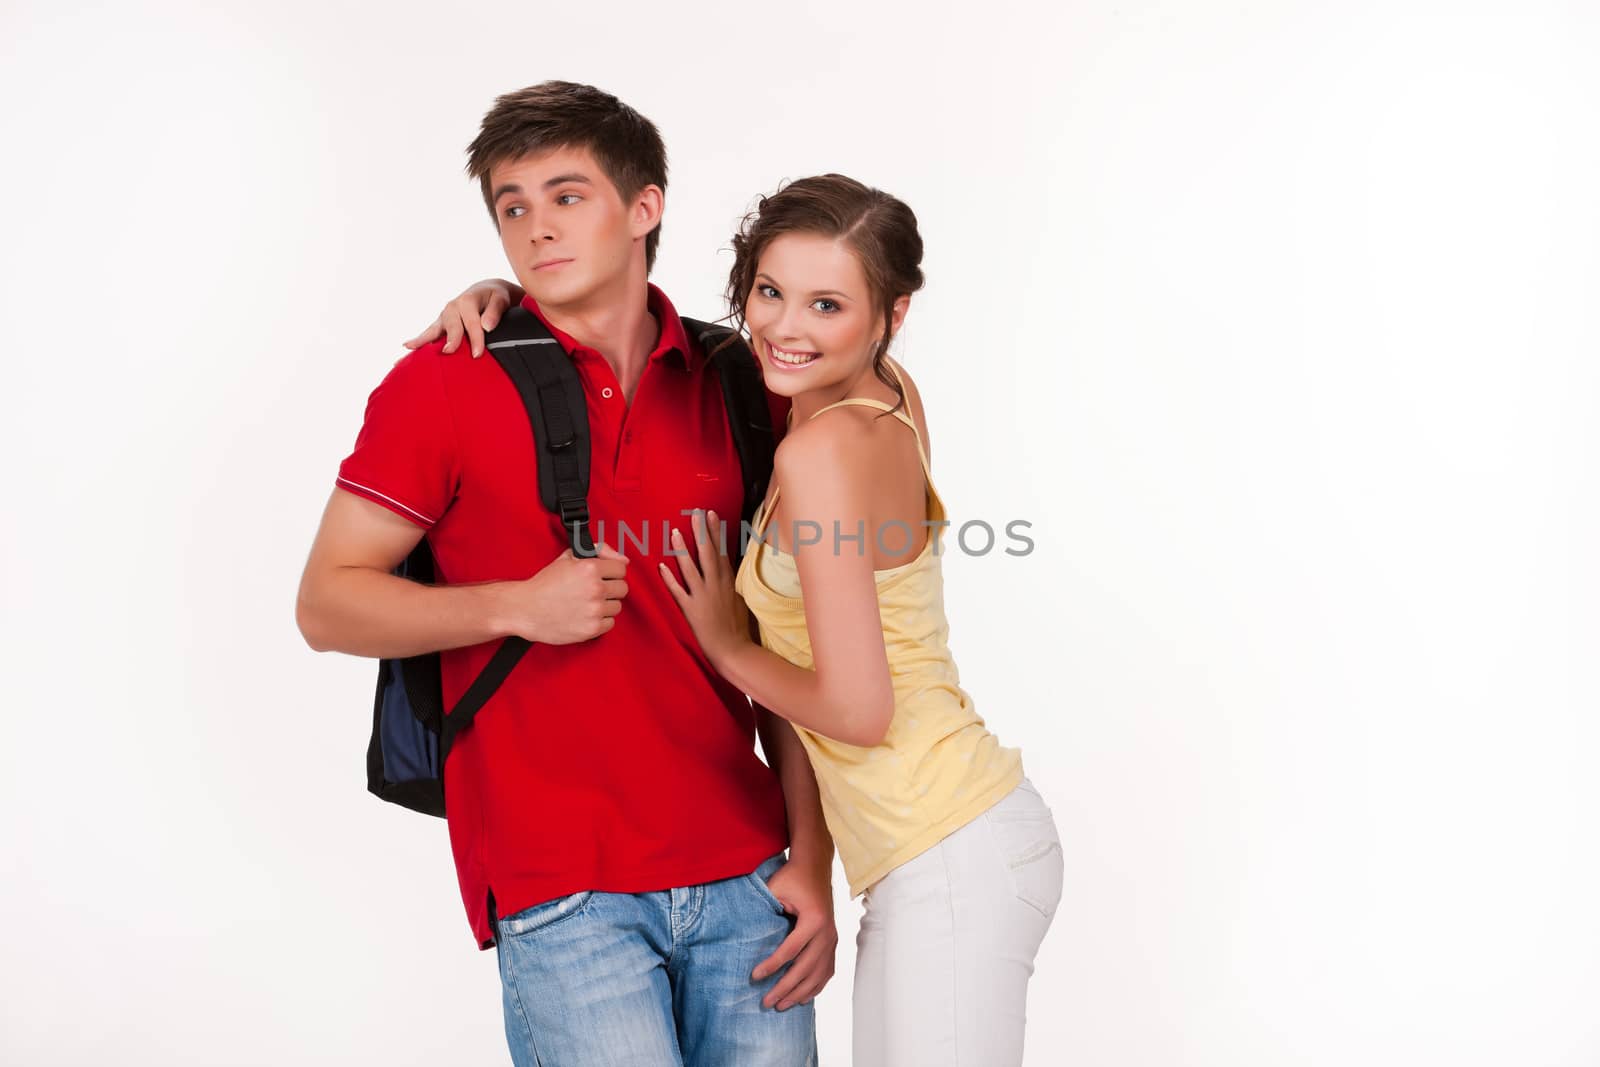 Young Smiling Woman and Man by Fotoskat